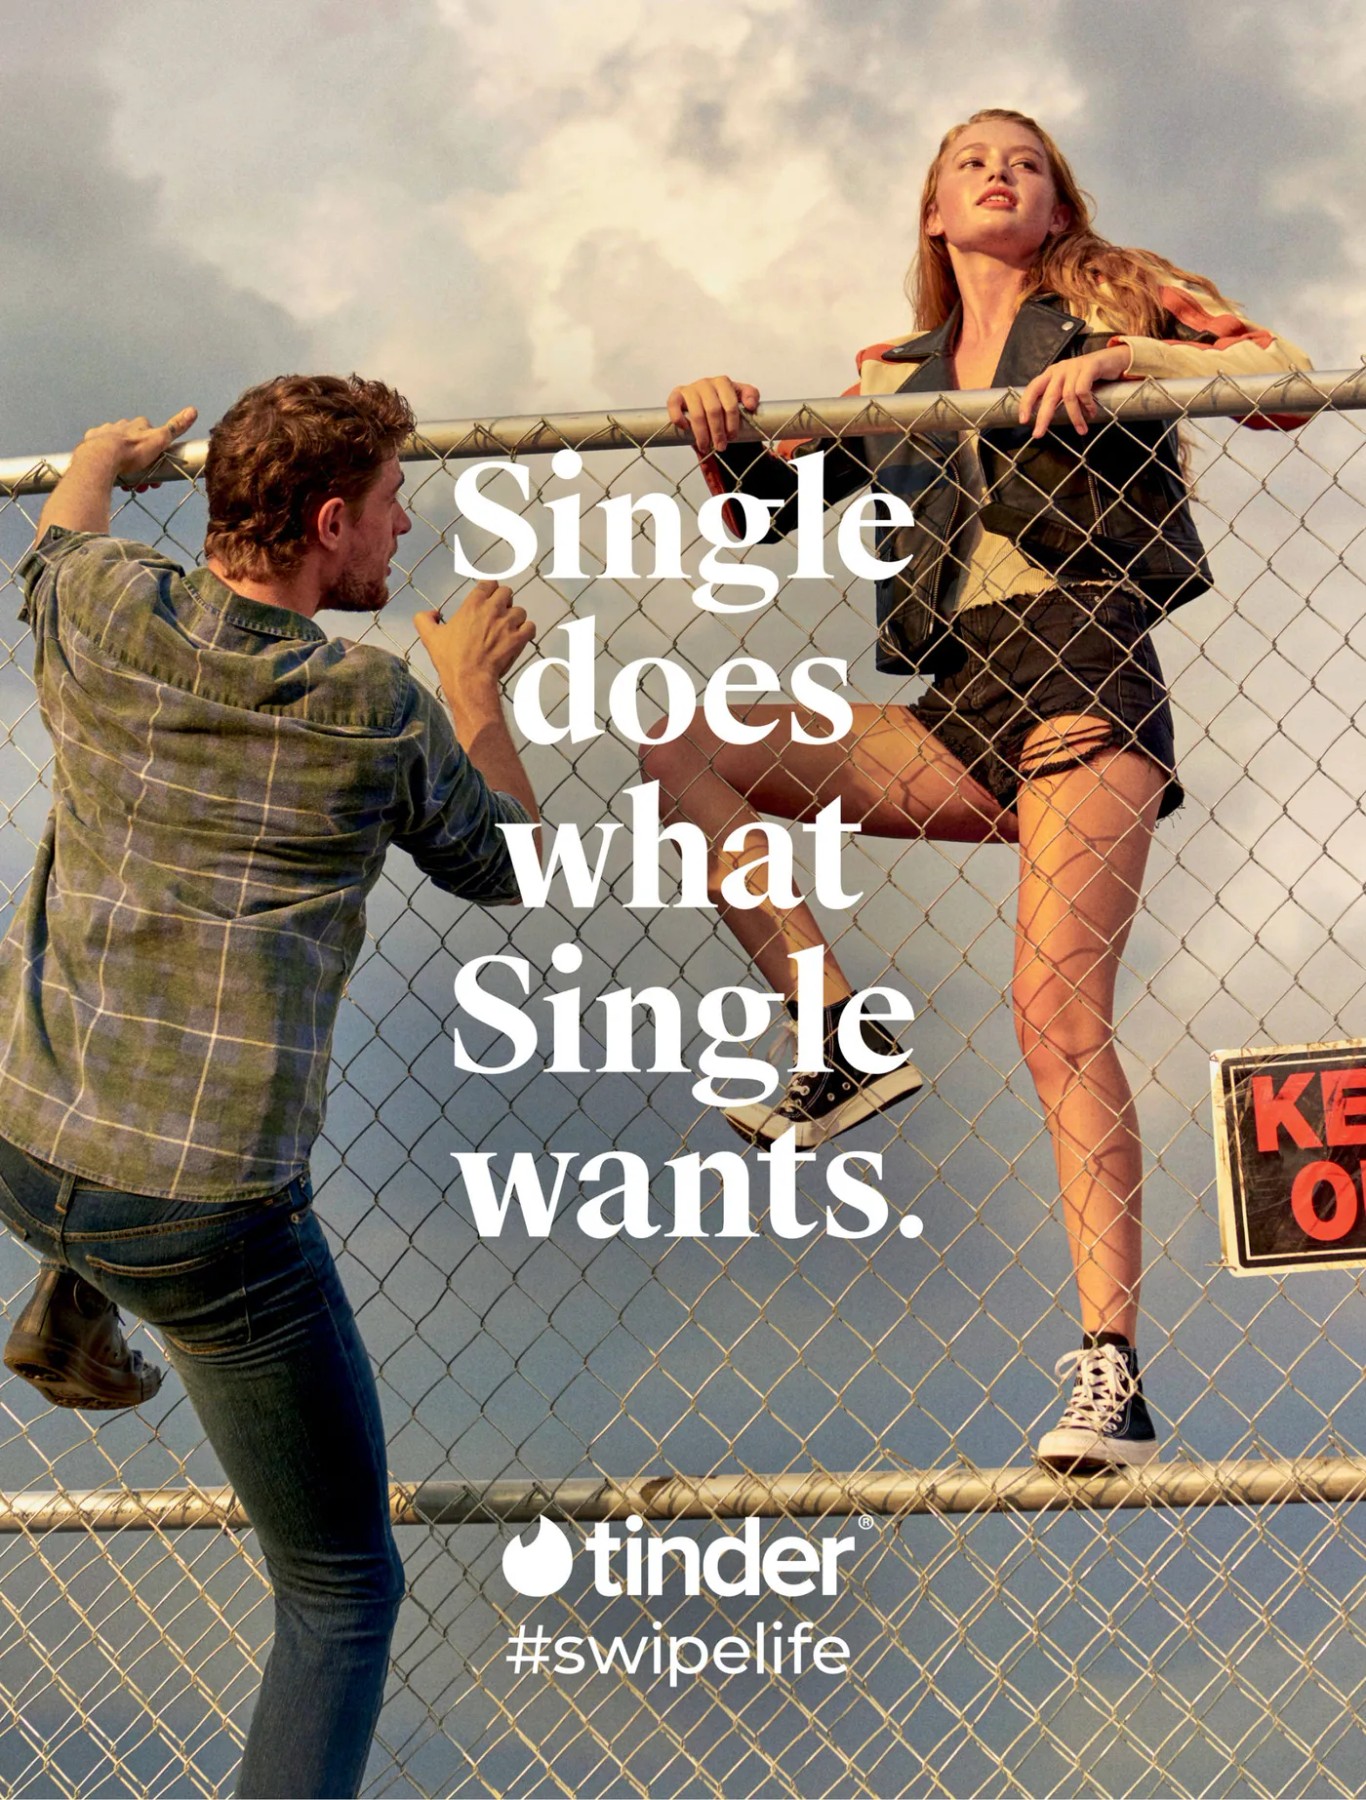 tinder_single_does_what_single_wants.webp